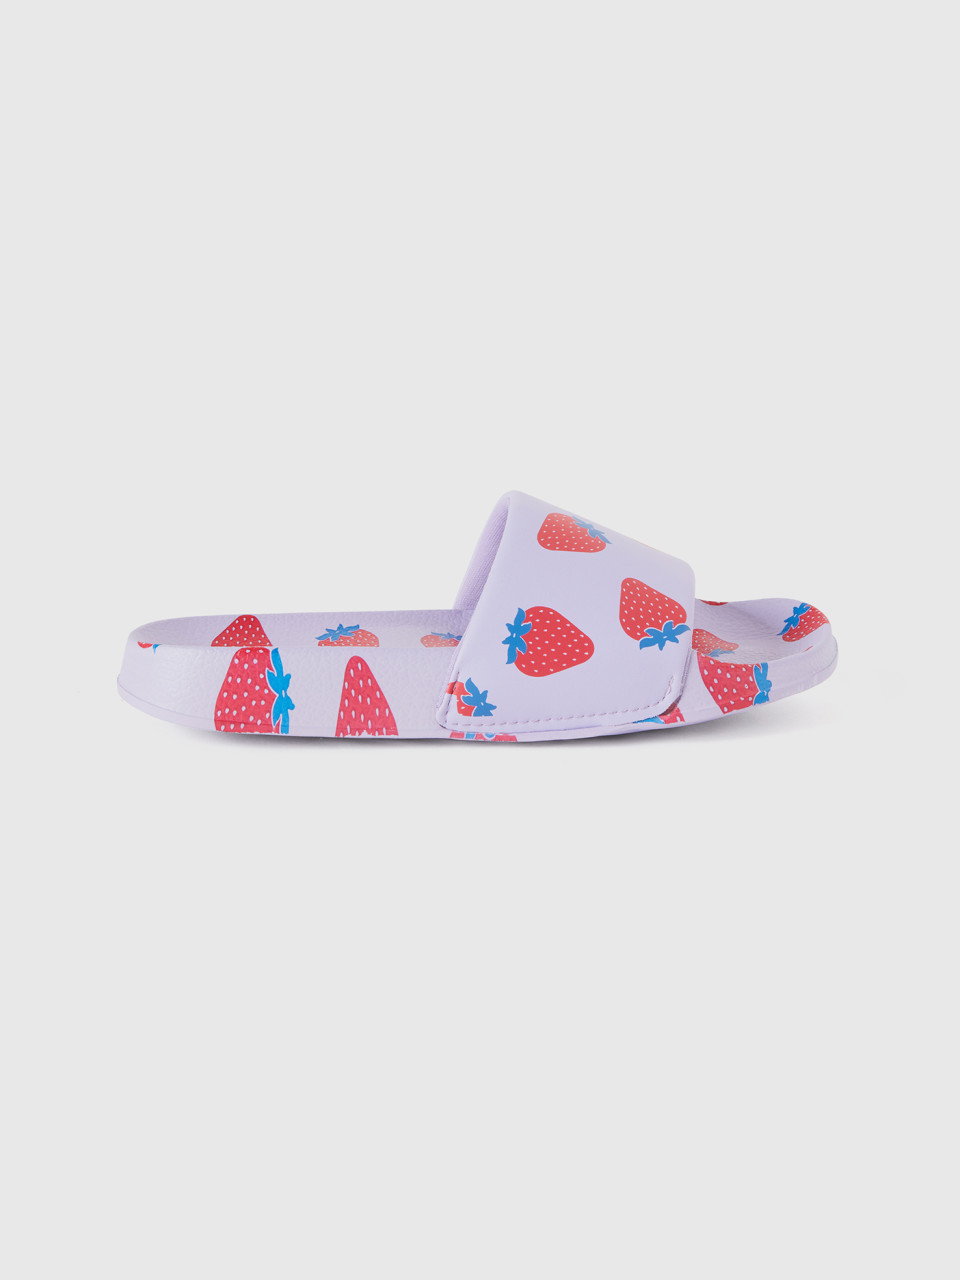 Benetton, Slippers With Strawberry Pattern, Lilac, Kids